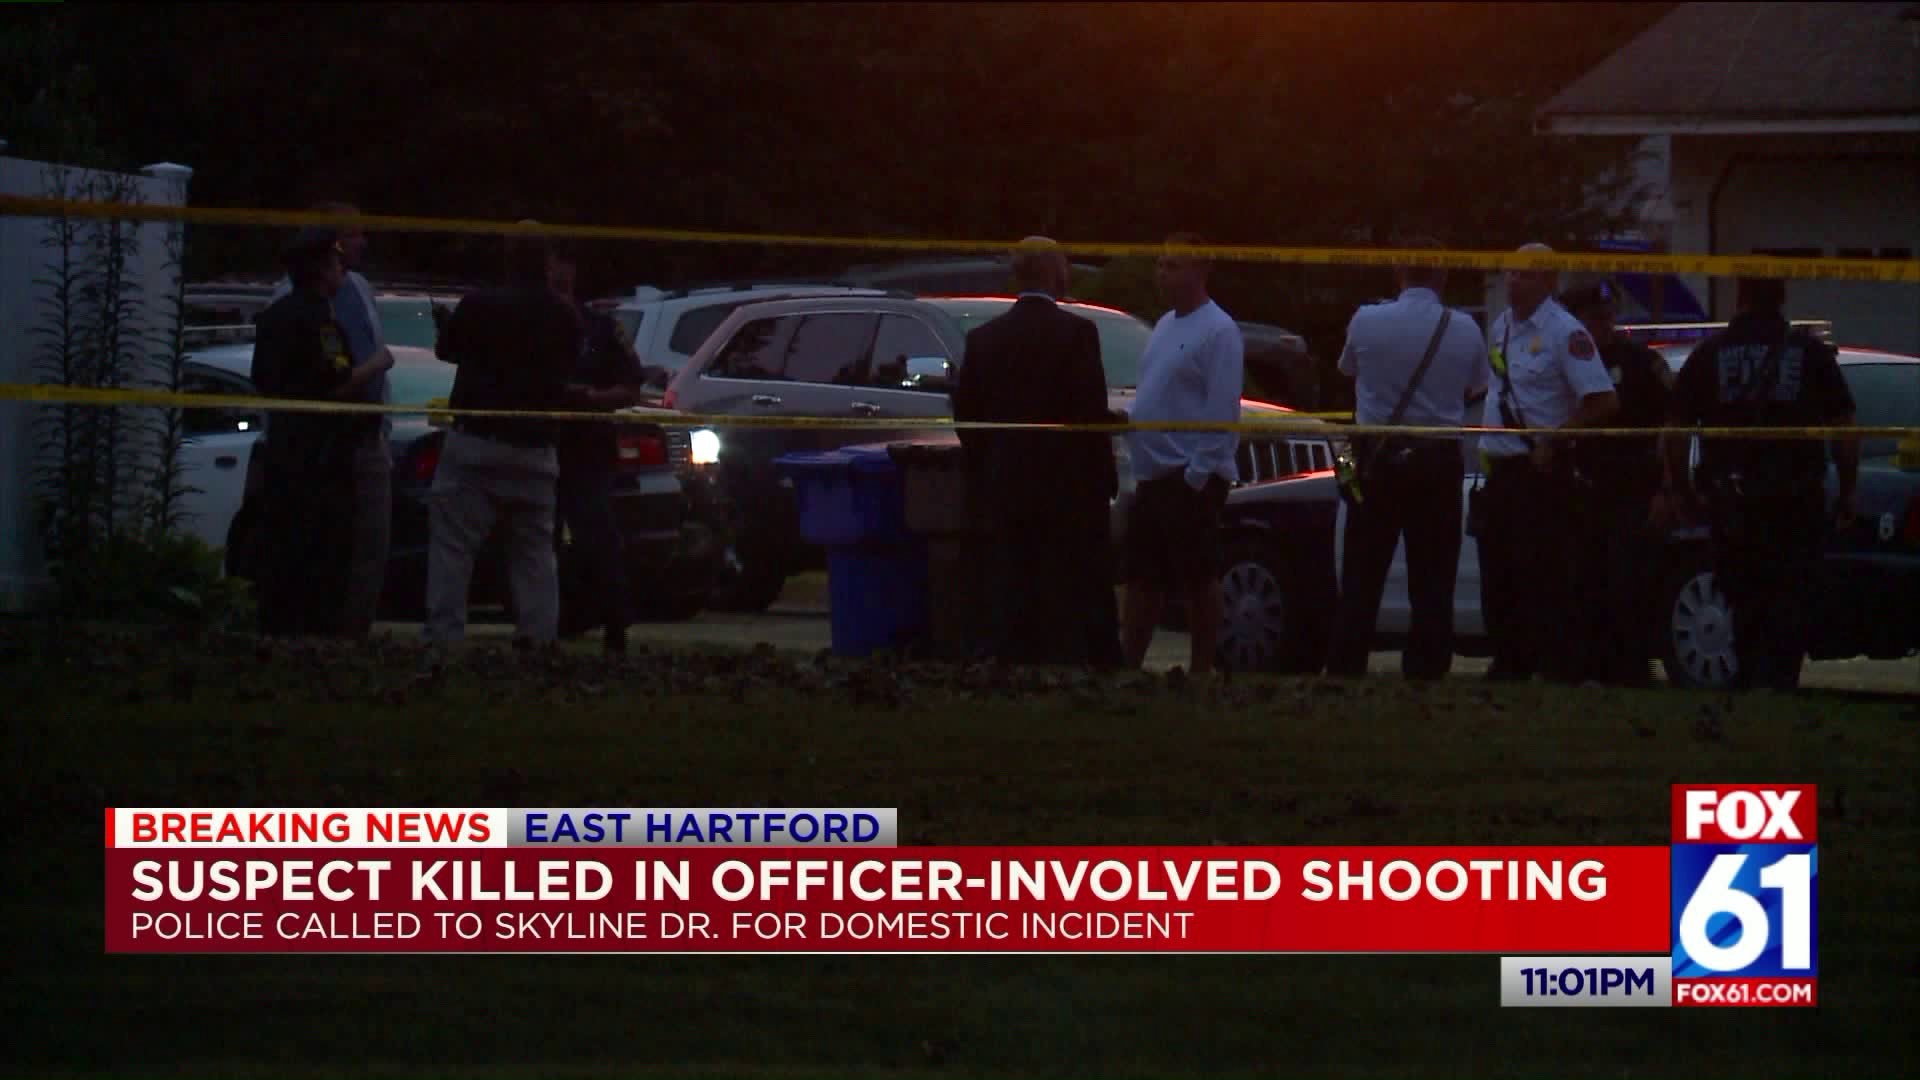 Suspect killed in officer-involved shooting in East Hartford